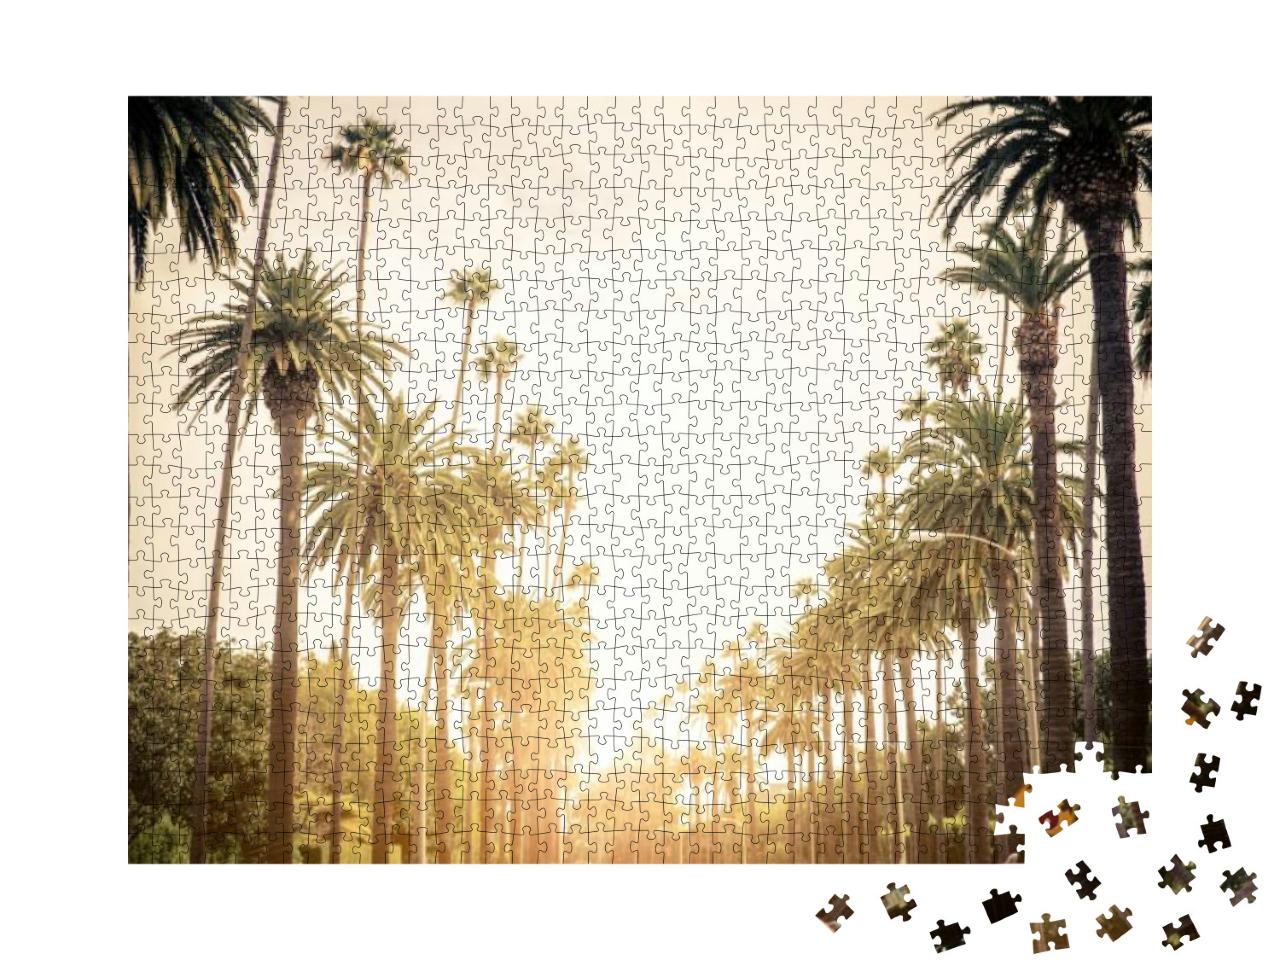 Beverly Hills Street with Palm Trees At Sunset, Los Angel... Jigsaw Puzzle with 1000 pieces